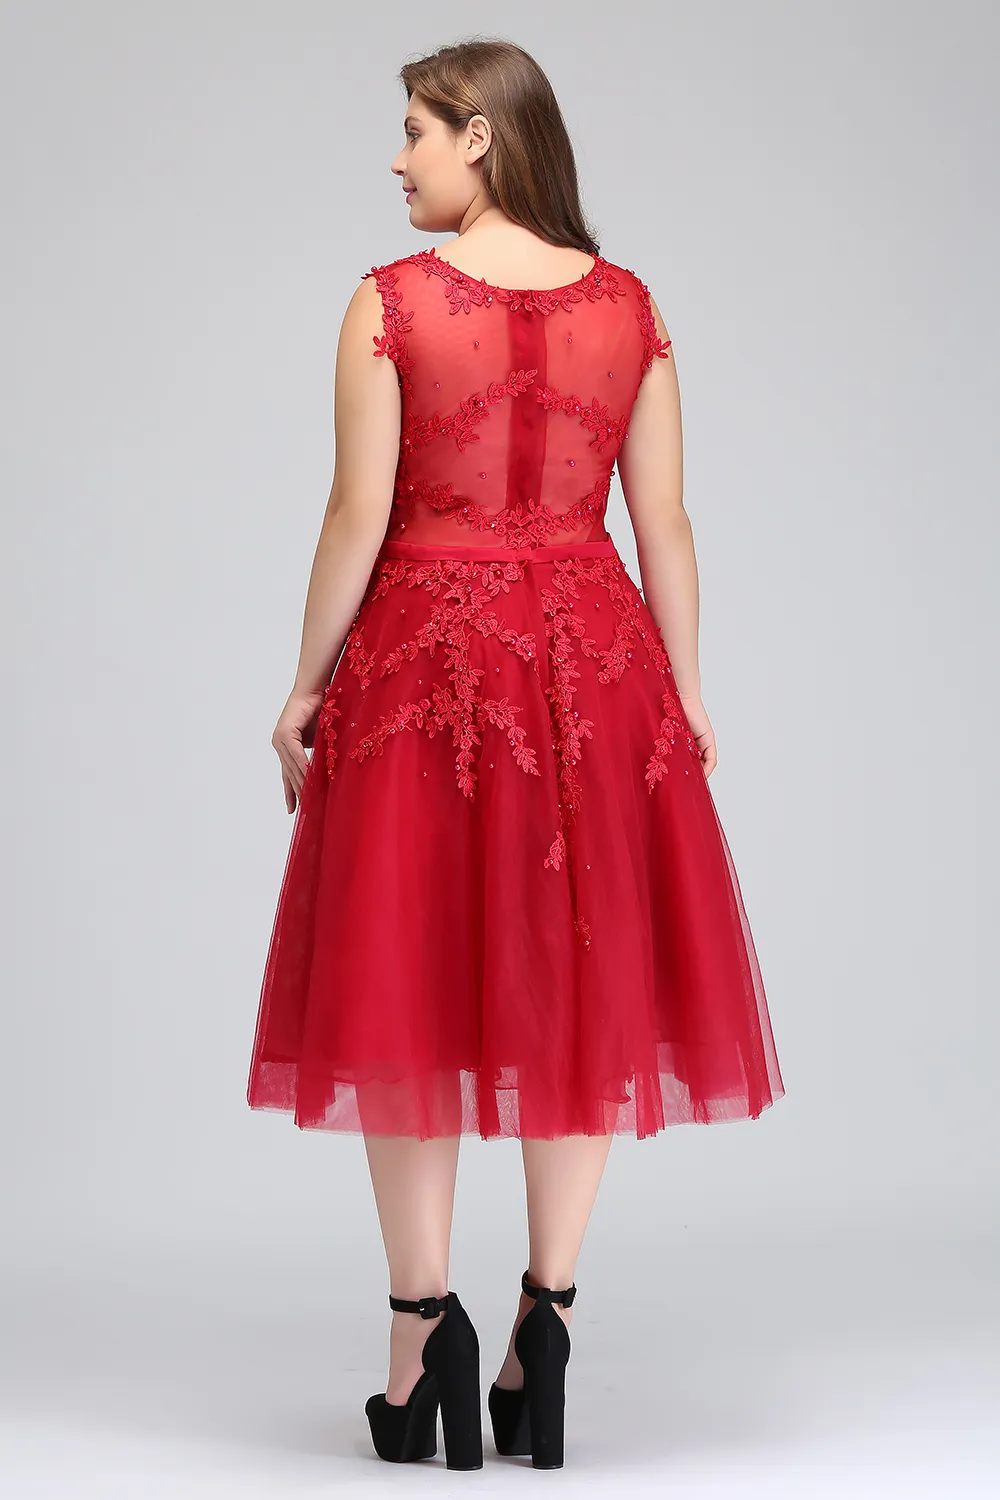 Real Image Plus Size Red Lace Short Cocktail Dresses Tulle Lace Beaded Knee Length A Line Formal Party Evening Dresses CPS298